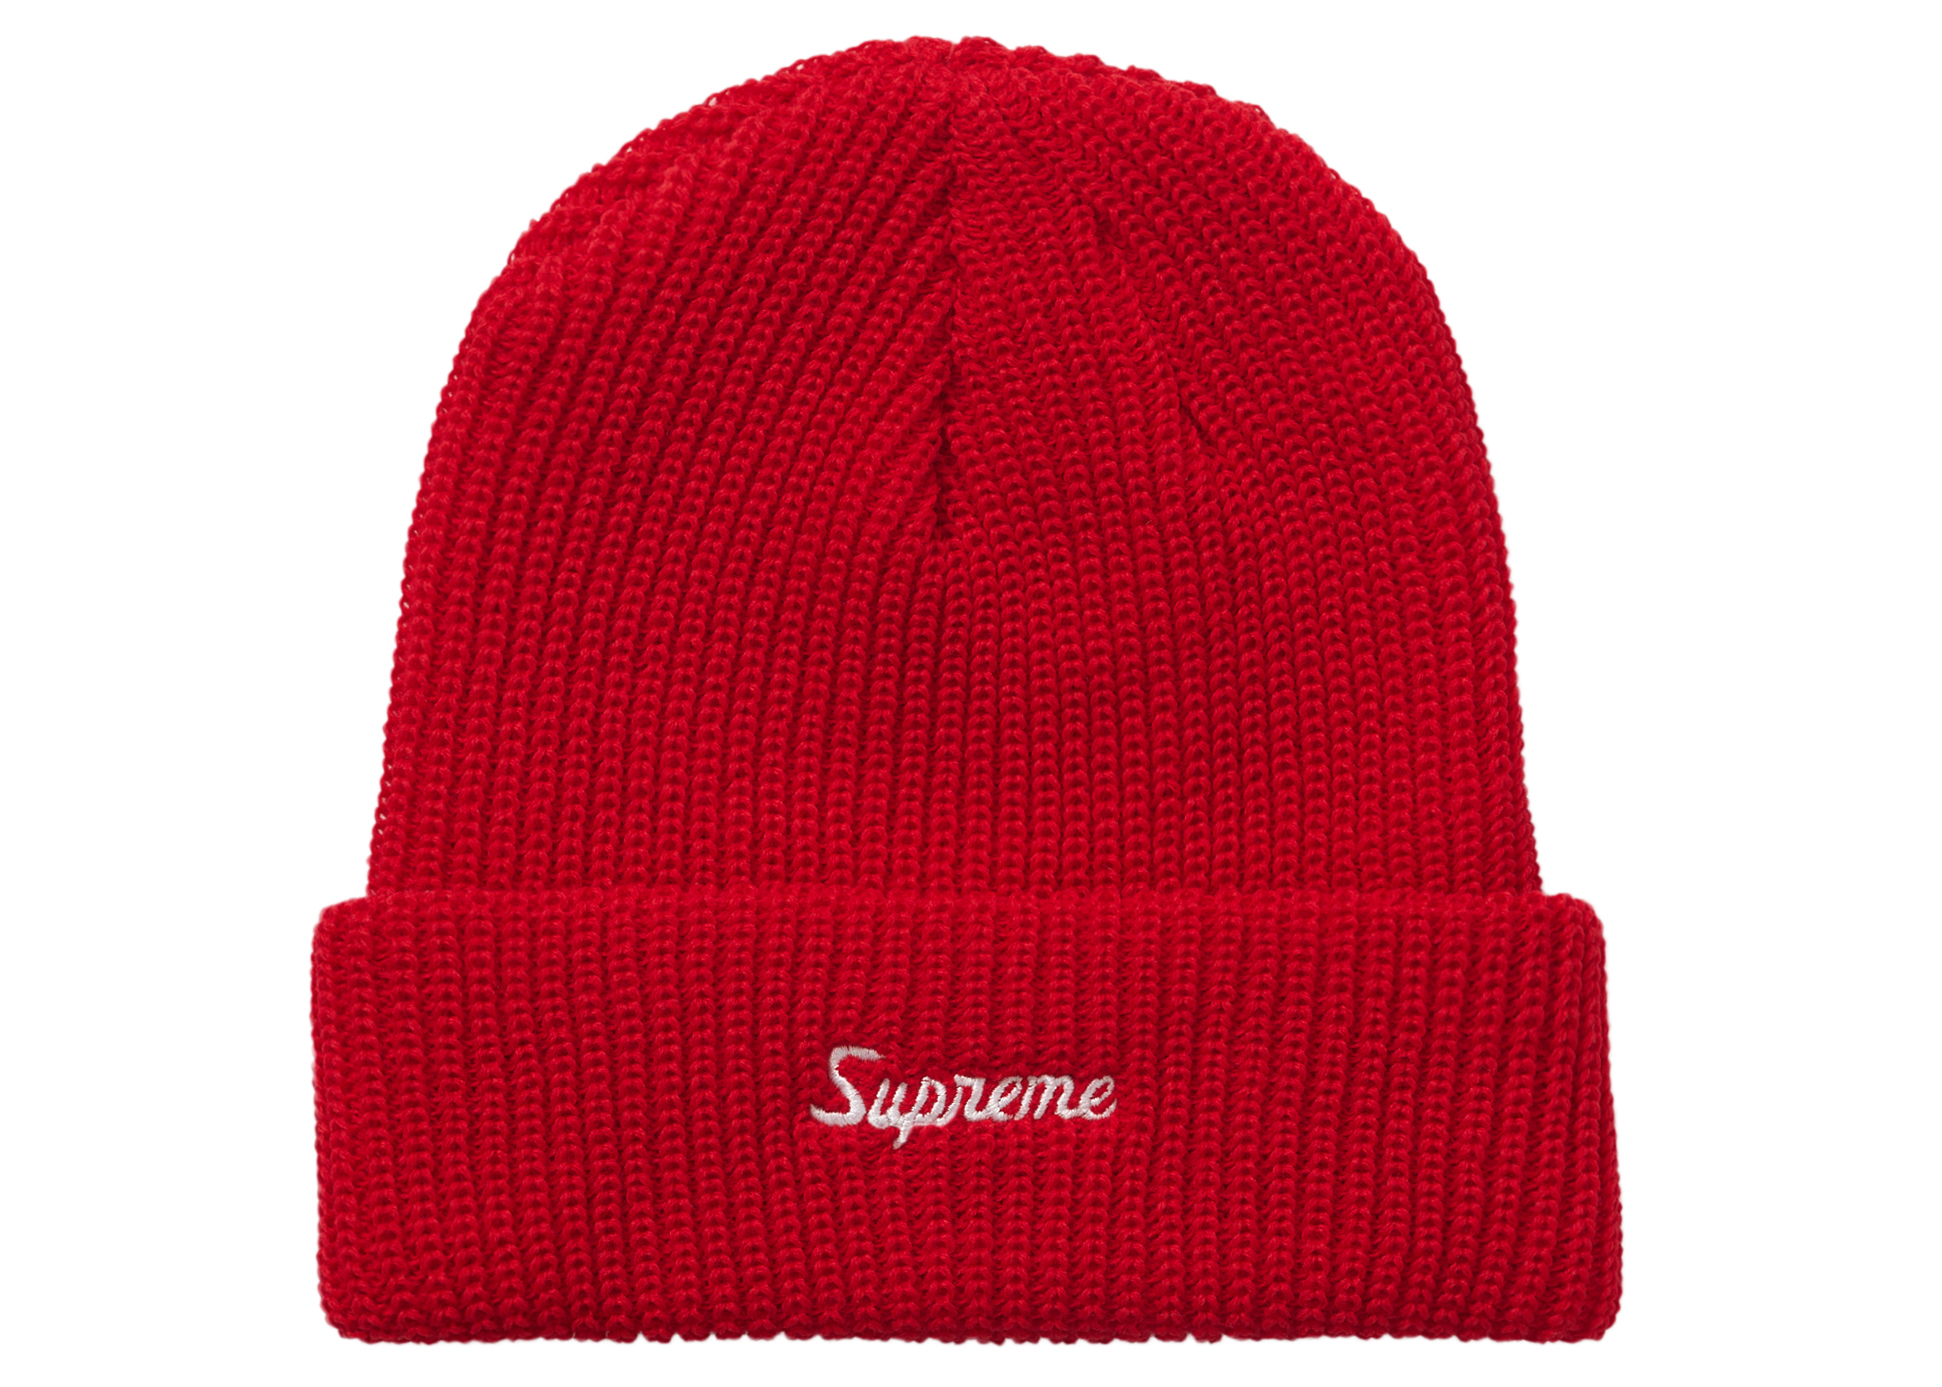 Supreme Loose Gauge Beanie (FW21) Bright Red - FW21 - US